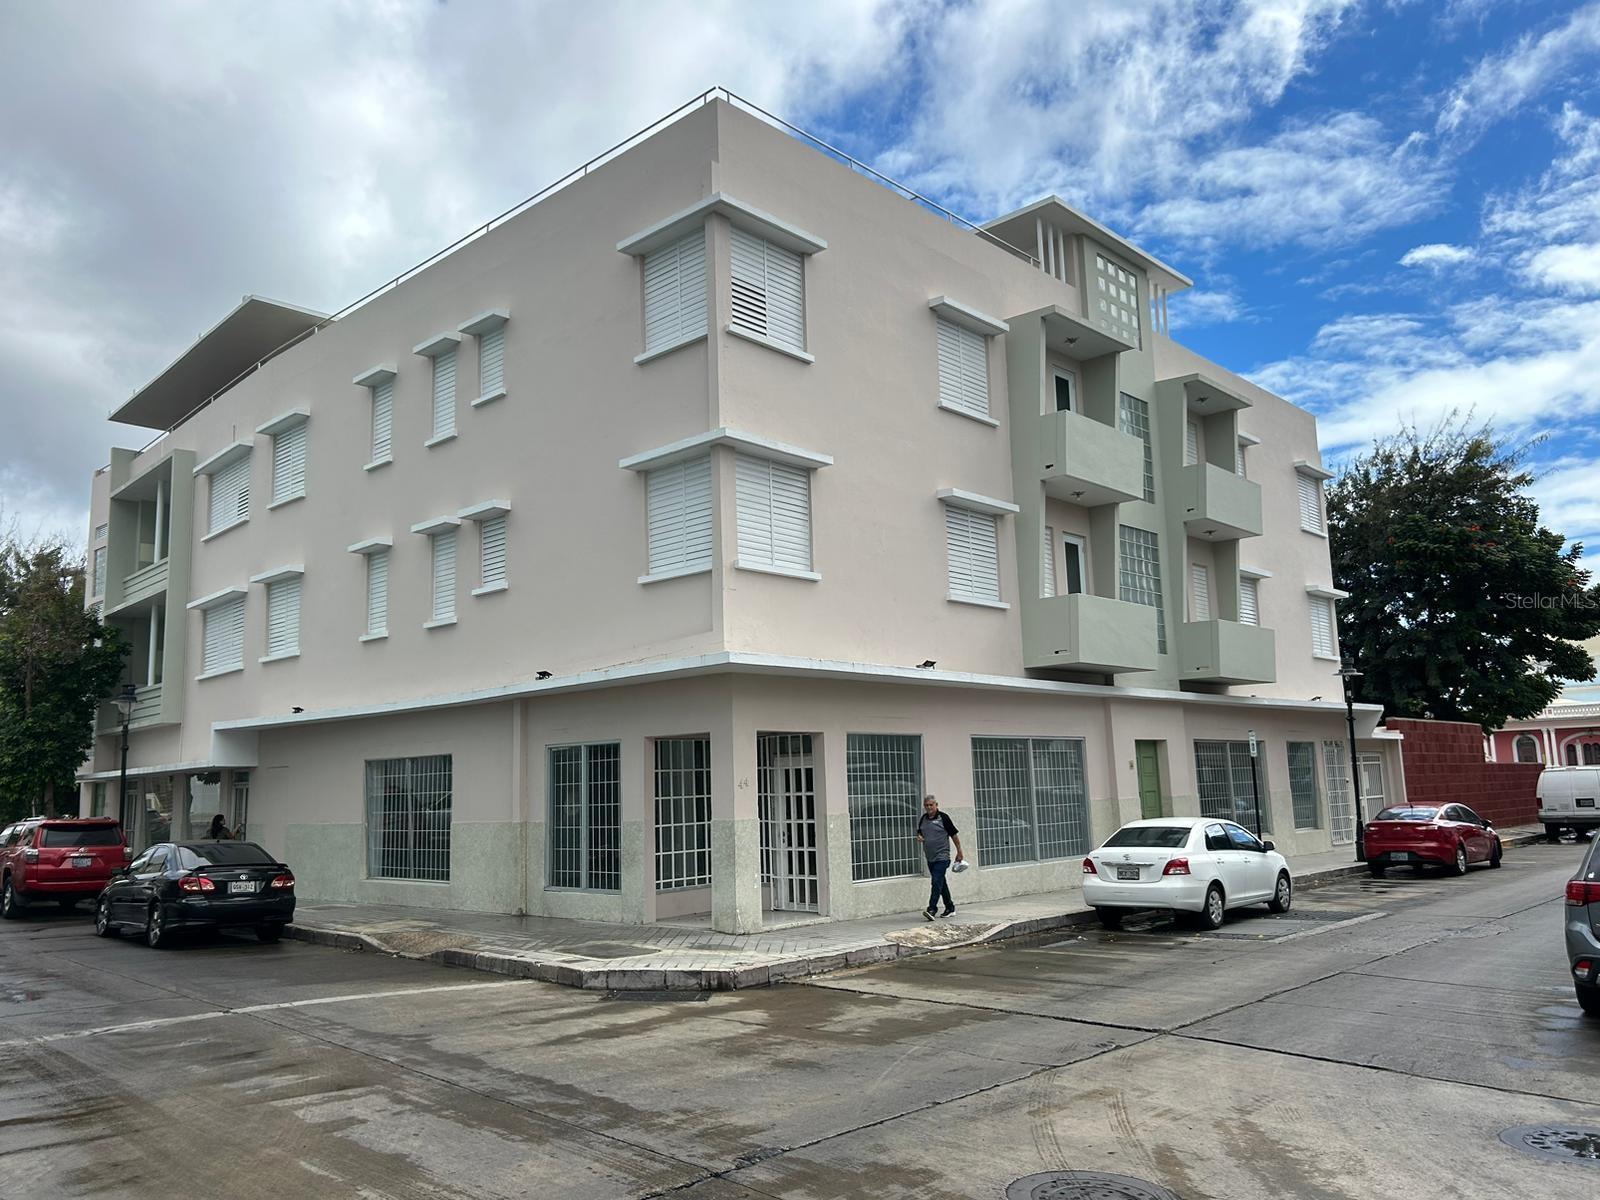 . Local 2 EDIFICIO ZAMORA SOL ST, MAYOR CANTERA ST, Ponce, Puerto Rico 00730, ,Commercial Lease,For Rent,EDIFICIO ZAMORA SOL ST, MAYOR CANTERA ST,PR9104720